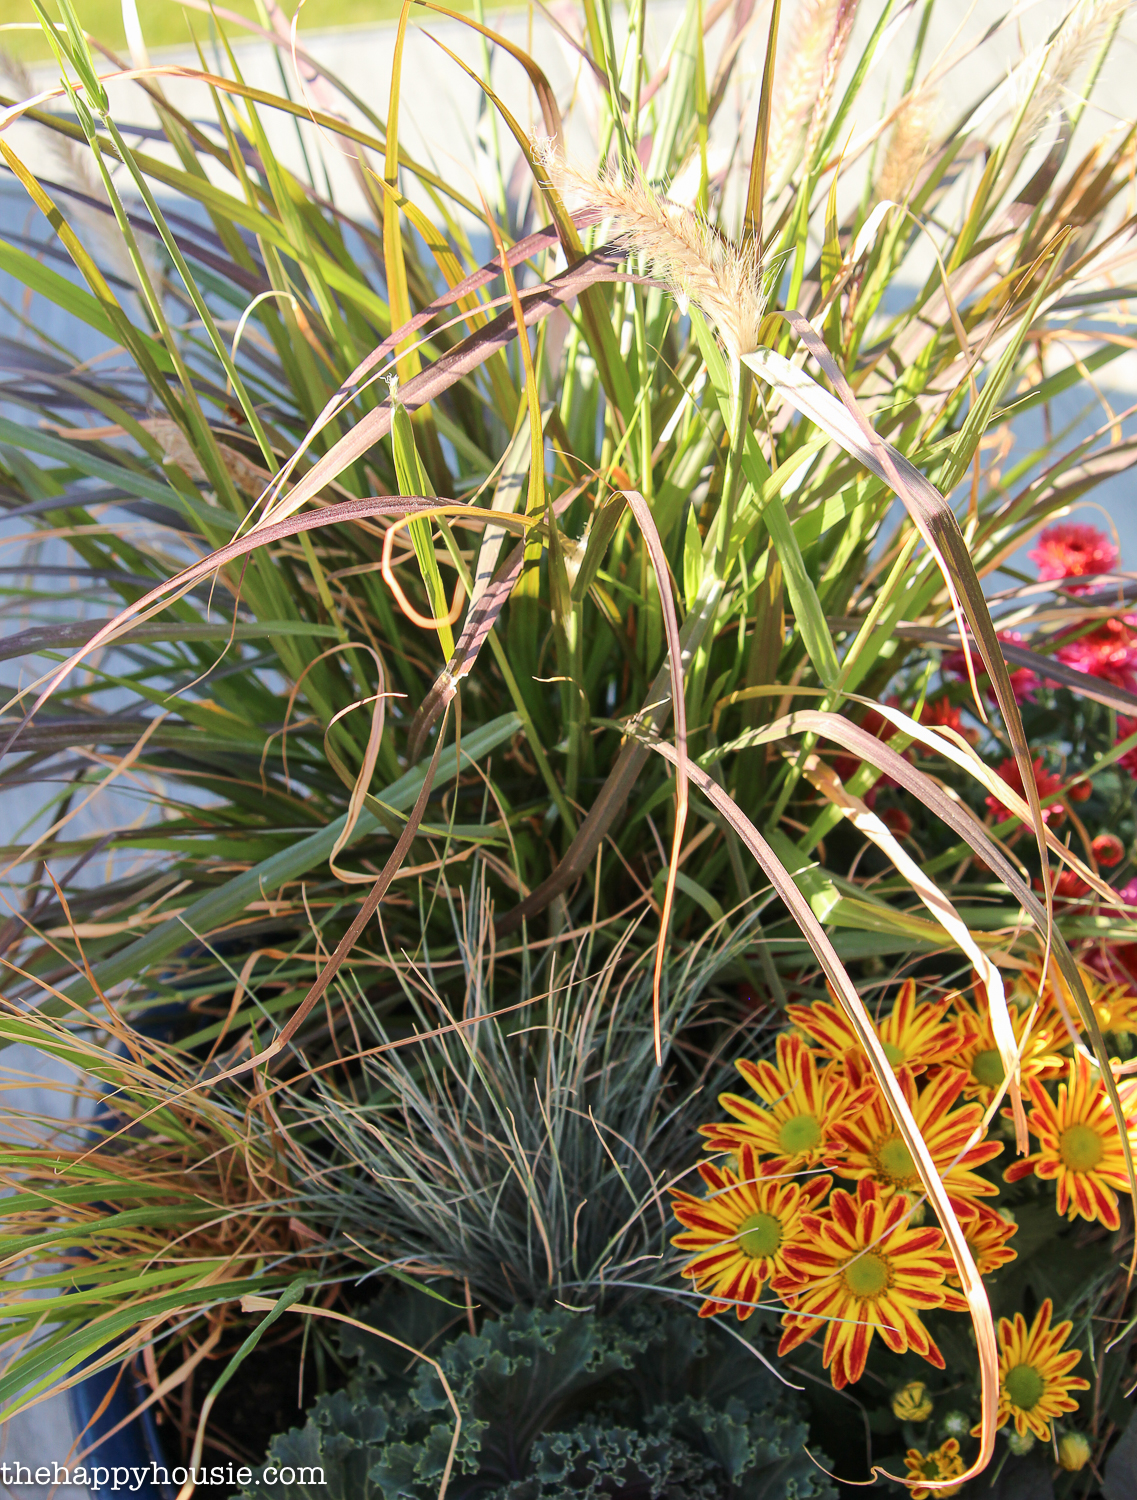 Up close picture of the grasses in the planter.